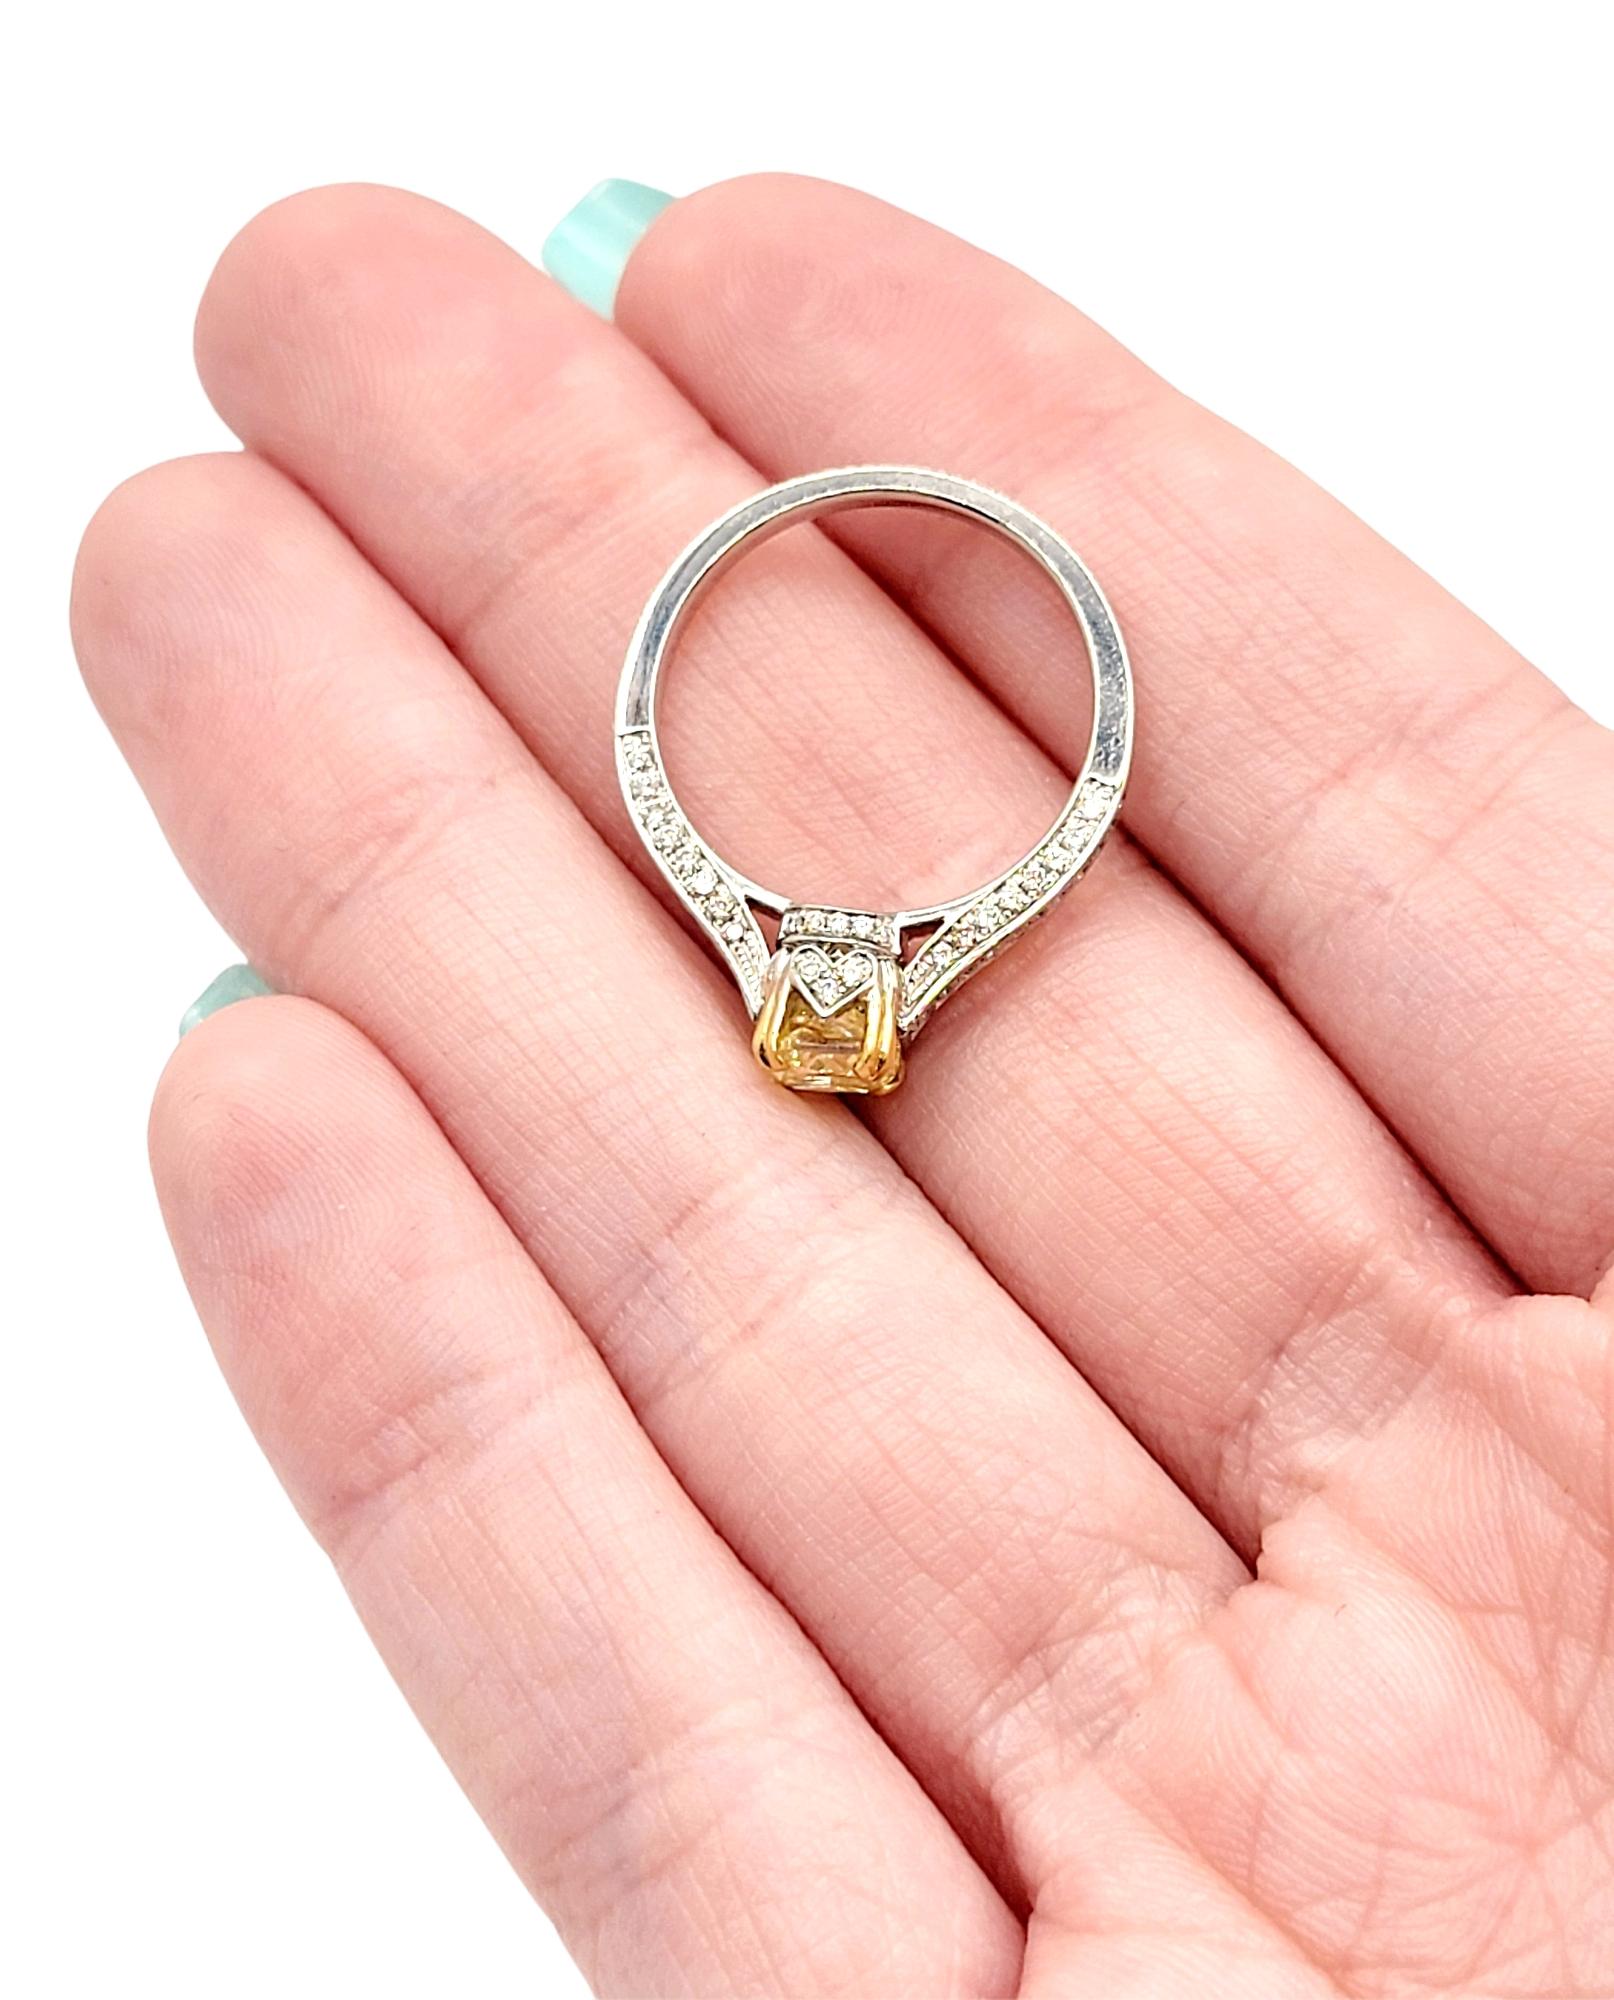 Radiant Cut Fancy Yellow Radiant Diamond Engagement Ring in White Gold For Sale 7